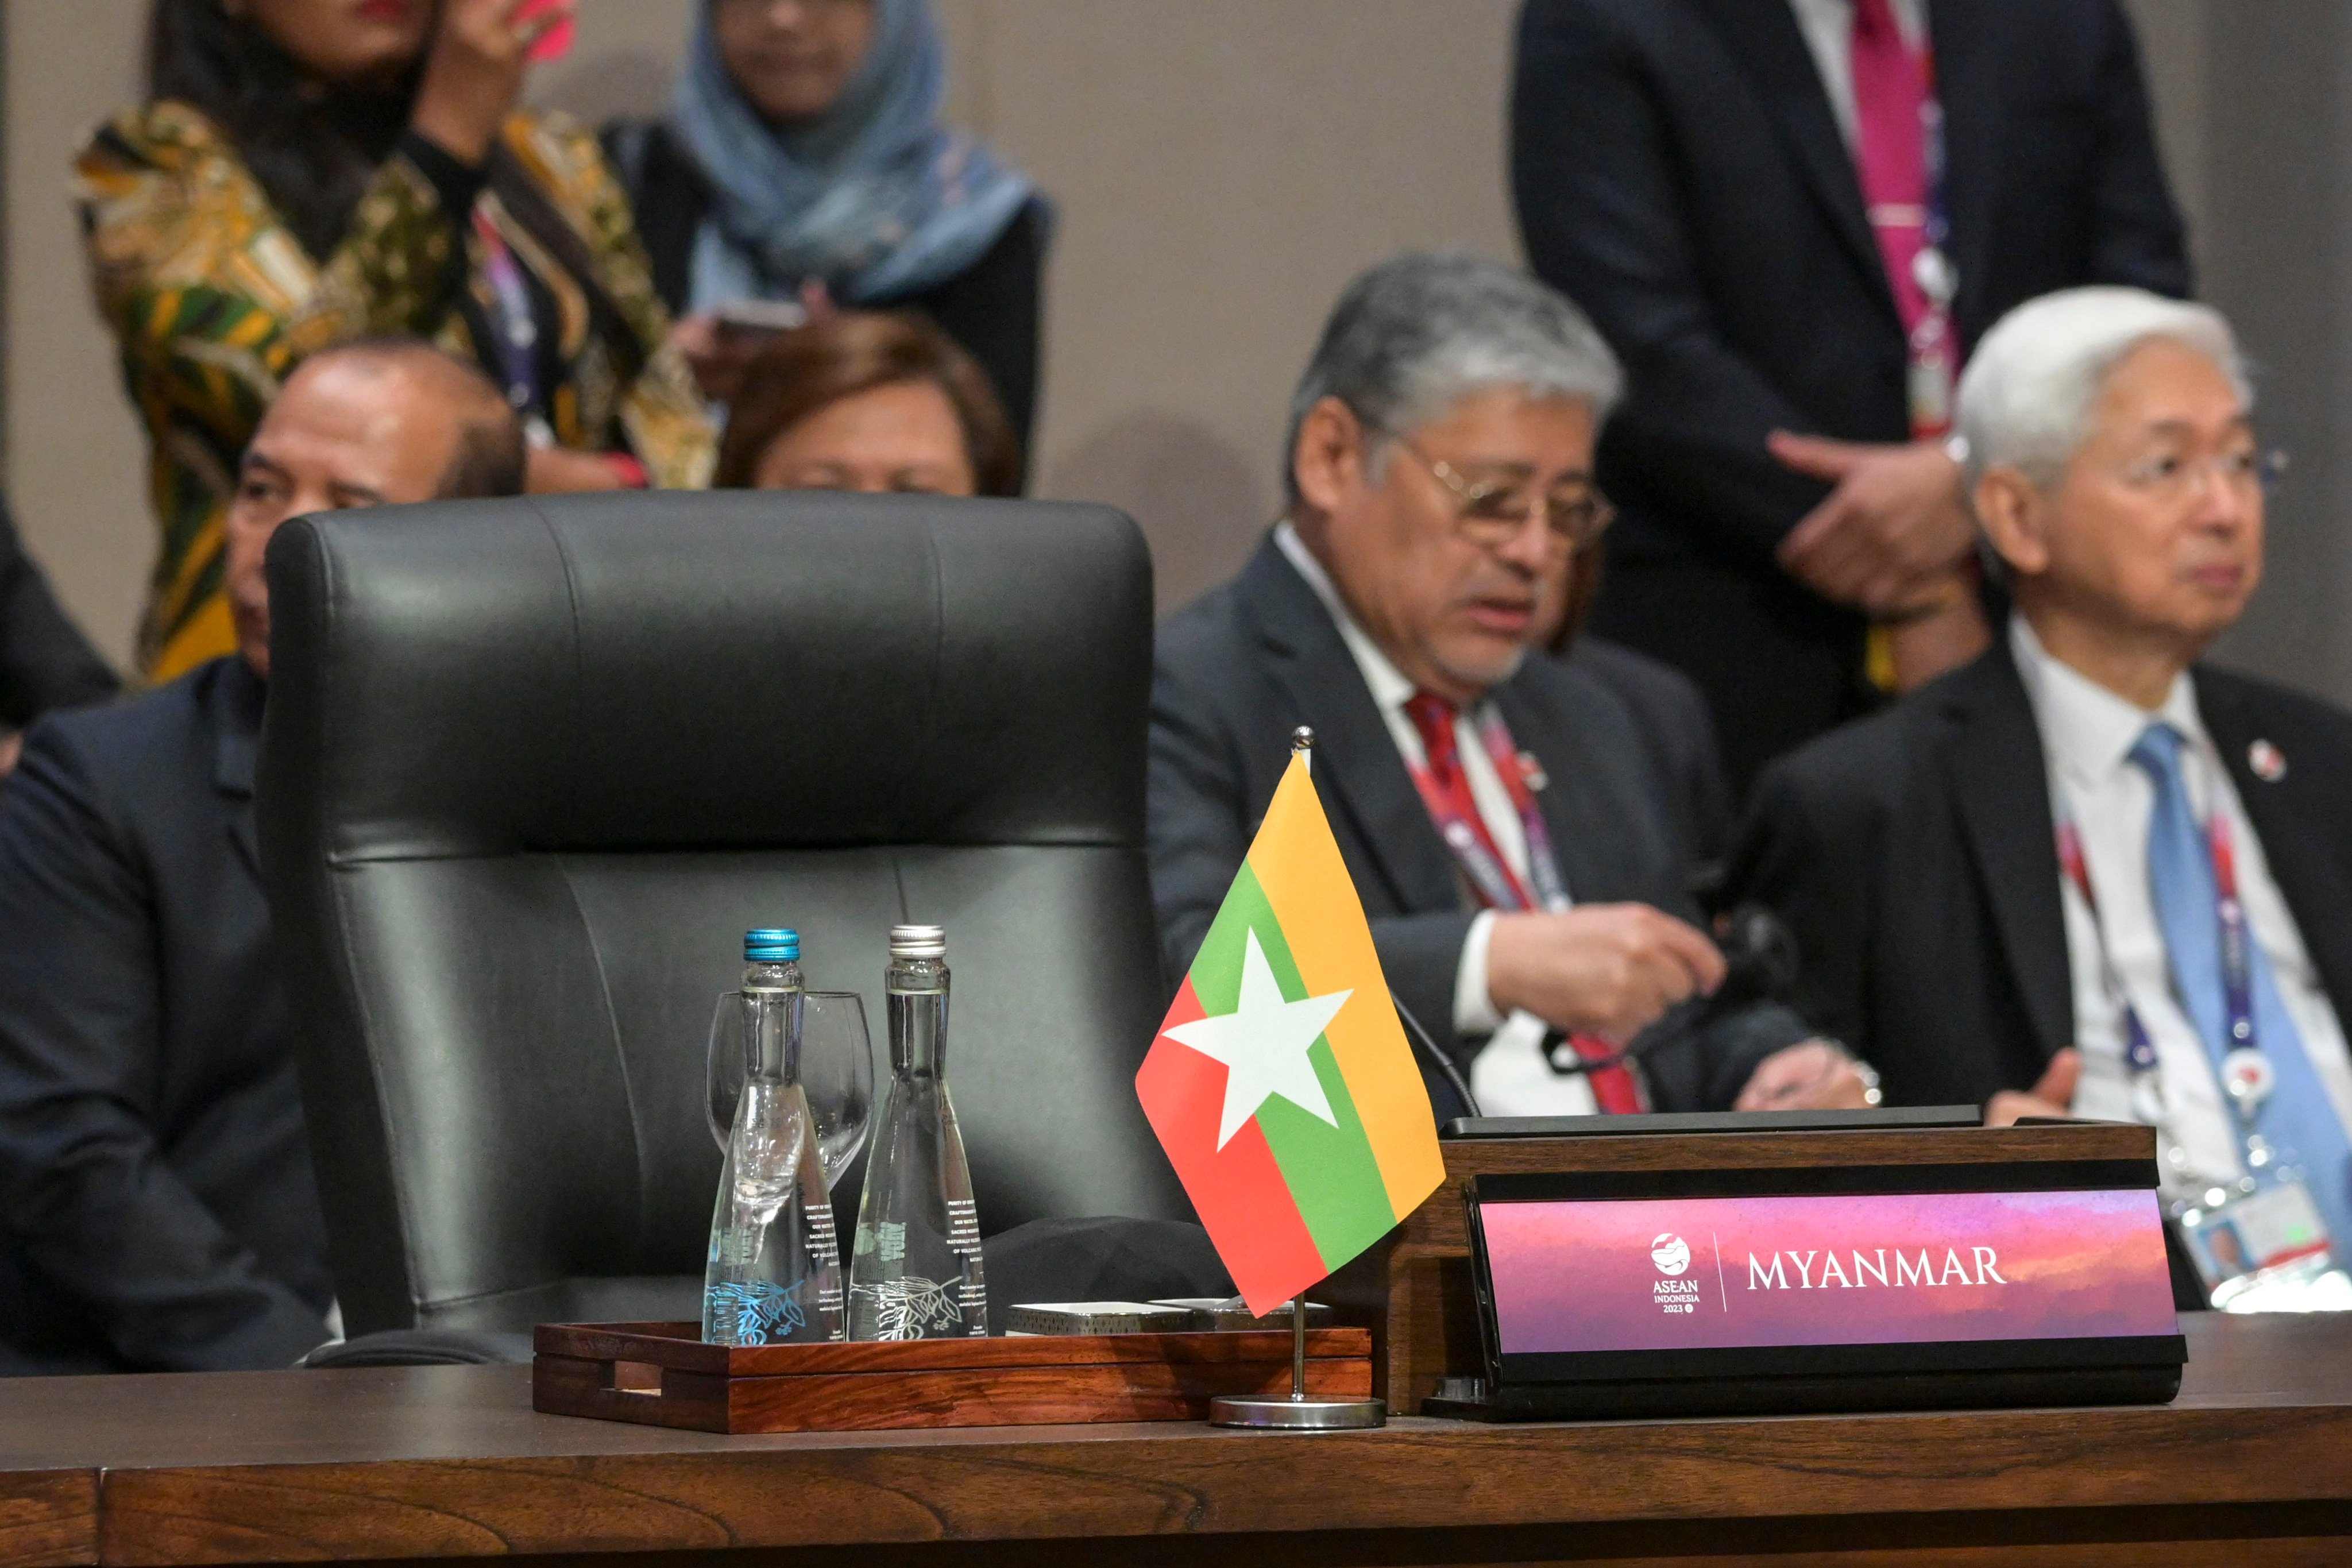 A seat reserved for the leader of Myanmar is seen left empty on Wednesday during the Asean-Japan Summit in Indonesia. Photo: AP